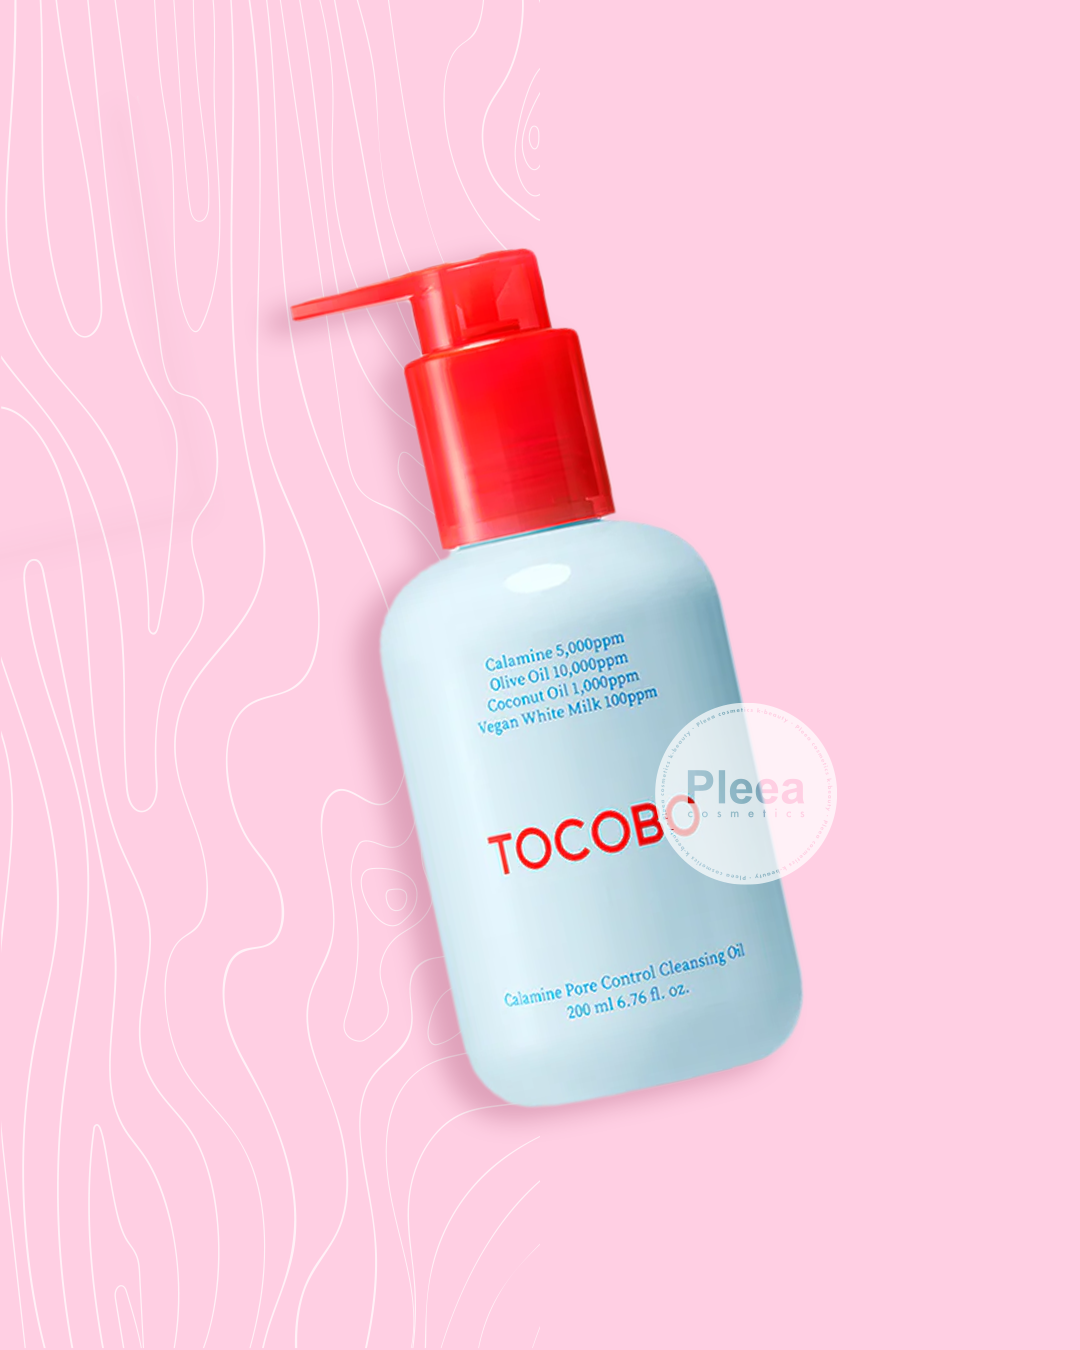 [TOCOBO] Calamine Pore Control Cleansing Oil